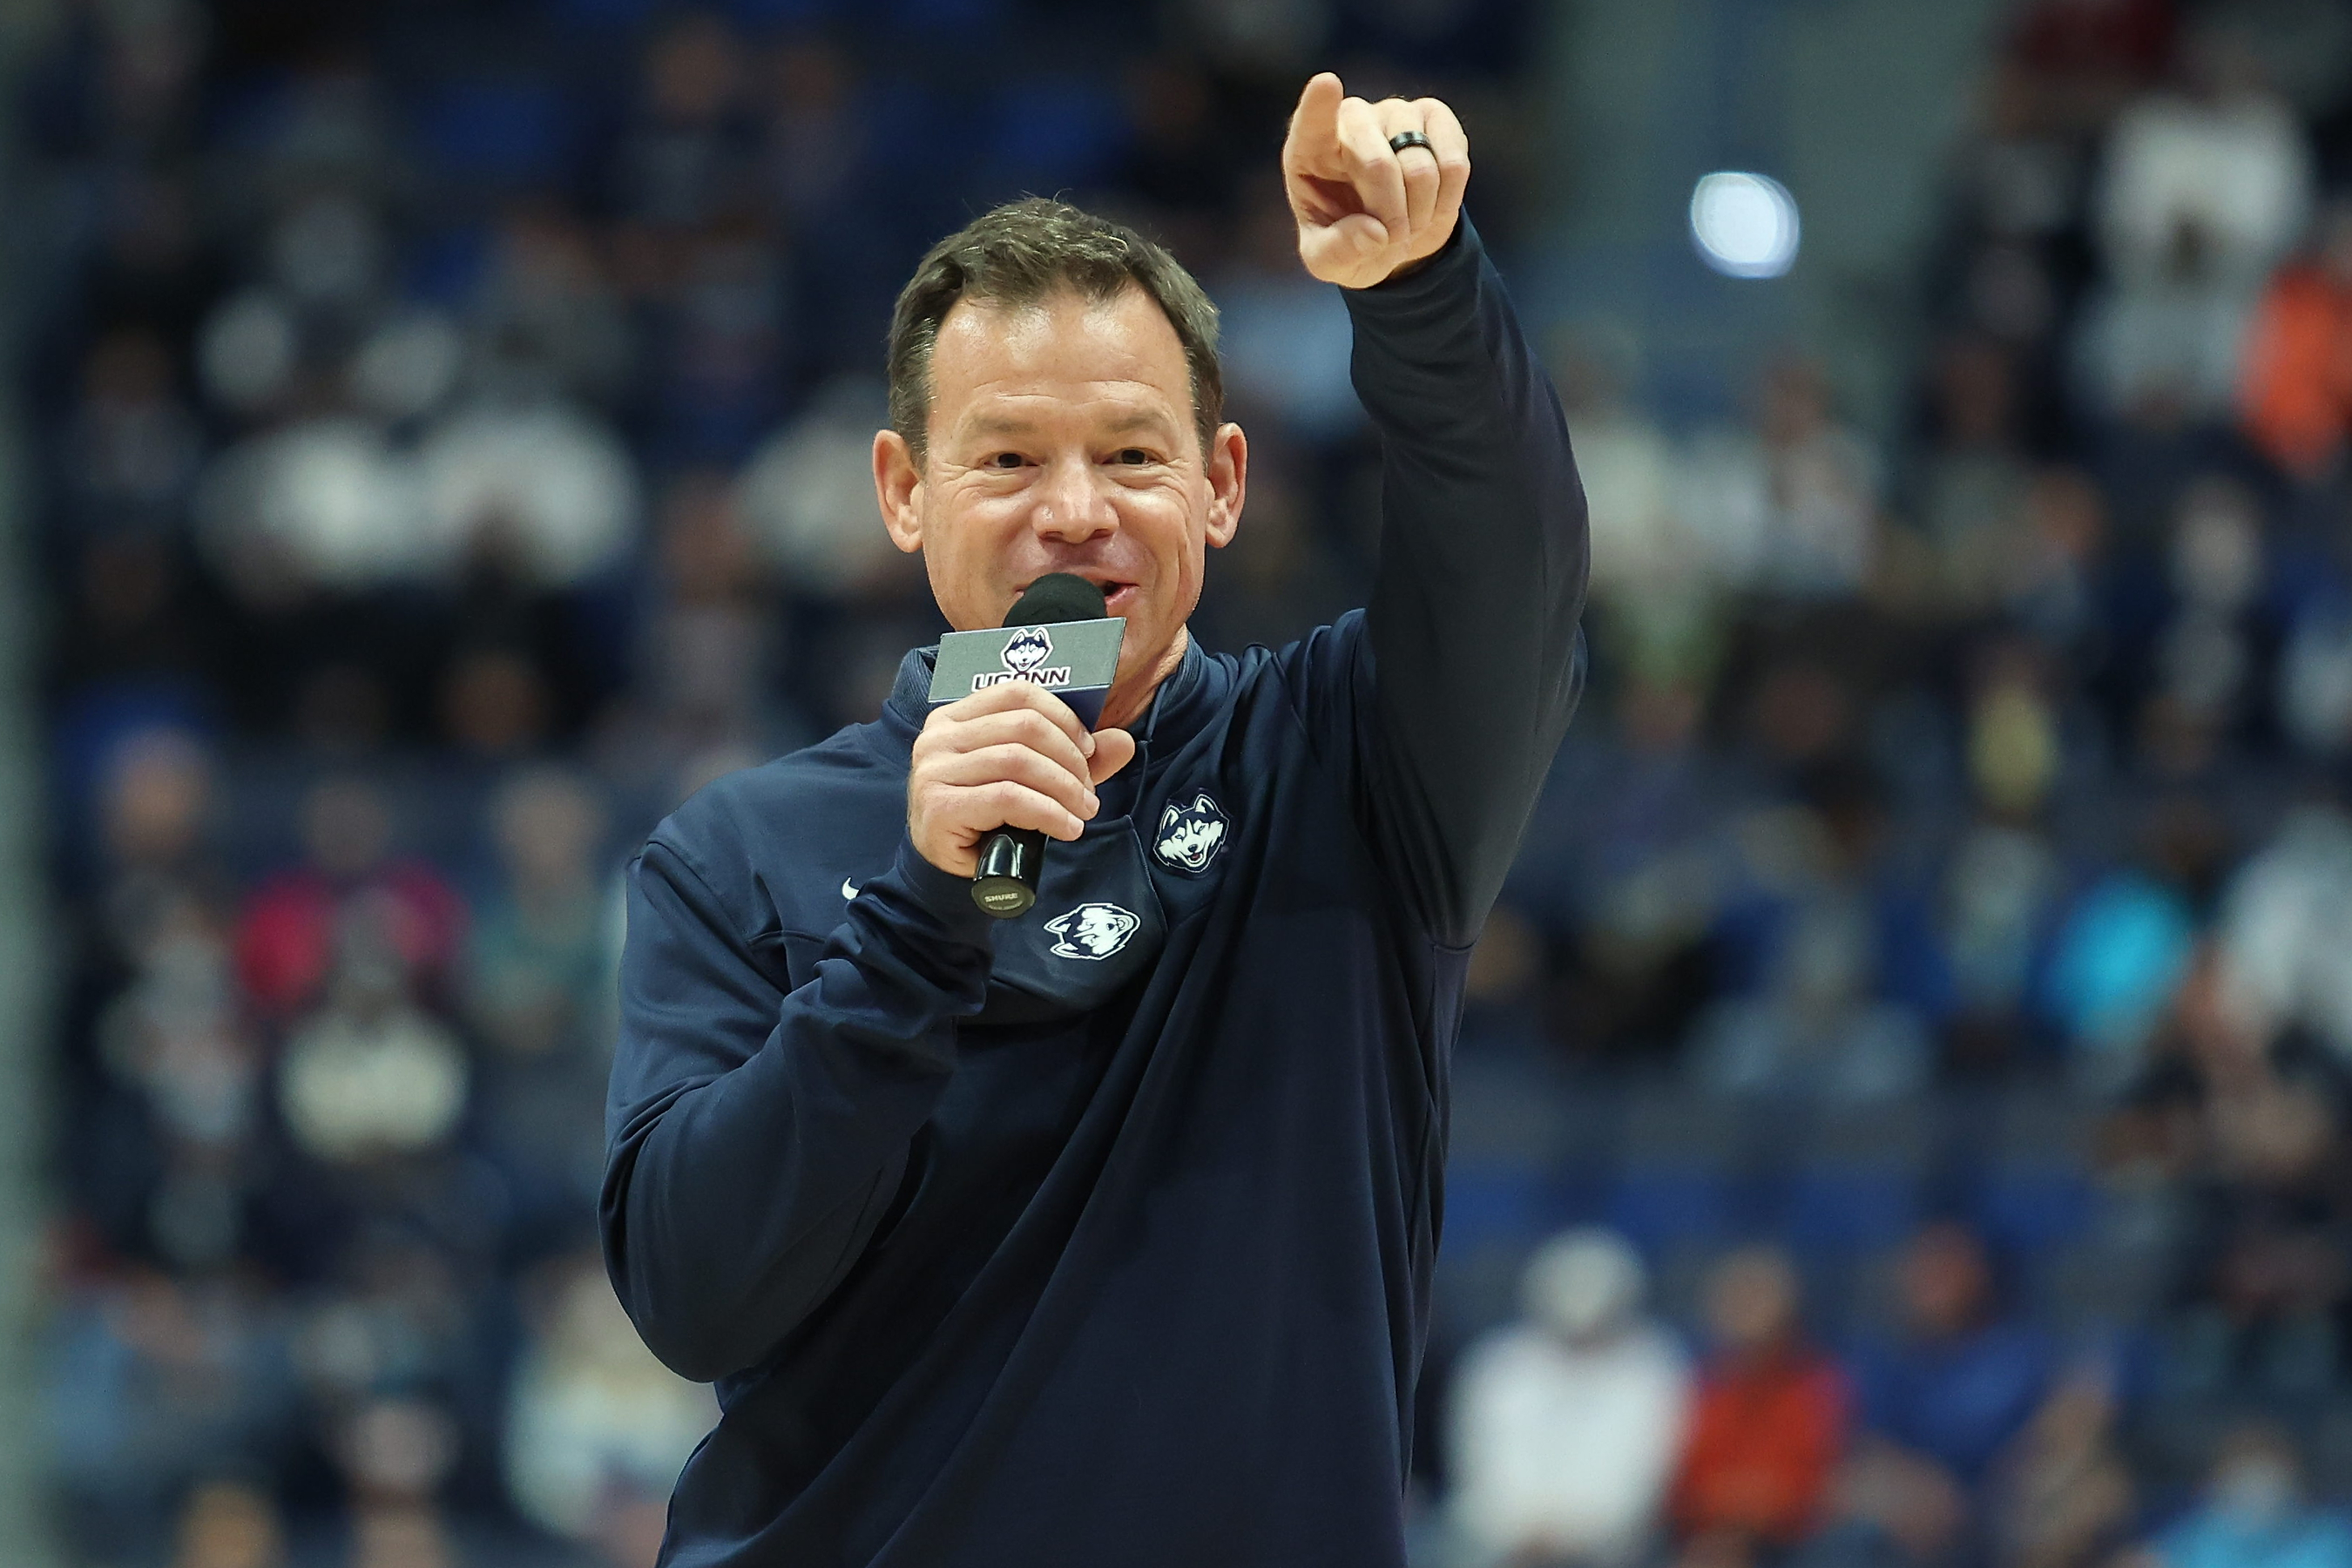 New UConn football coach Jim Mora, Jr. speaks to the crowd at the UConn women’s basketball game at the XL Center on Sunday, November 14, 2021.